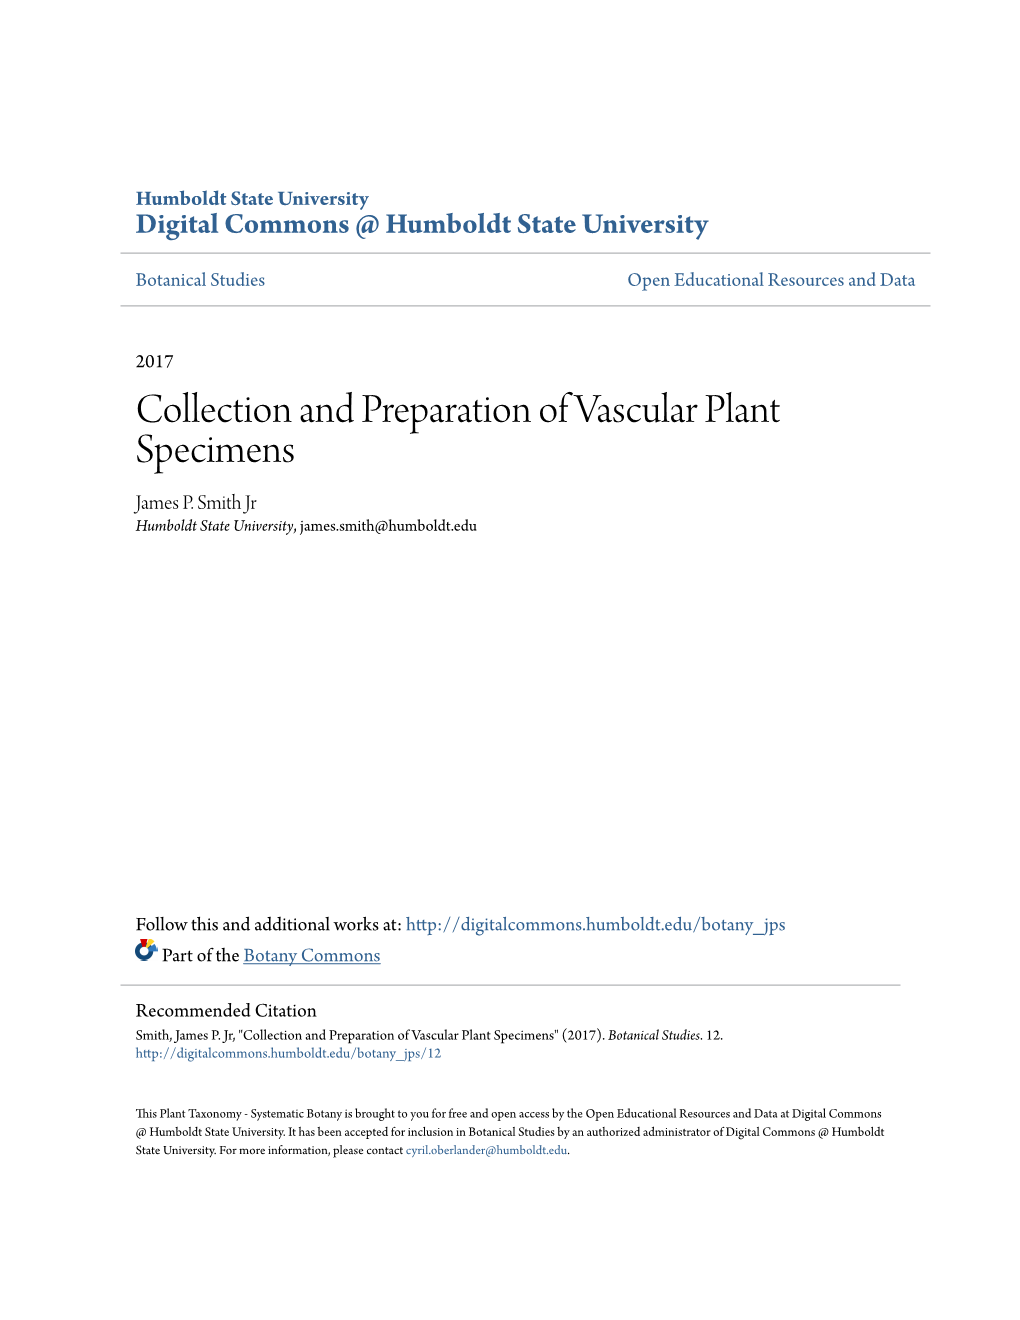 Collection and Preparation of Vascular Plant Specimens James P